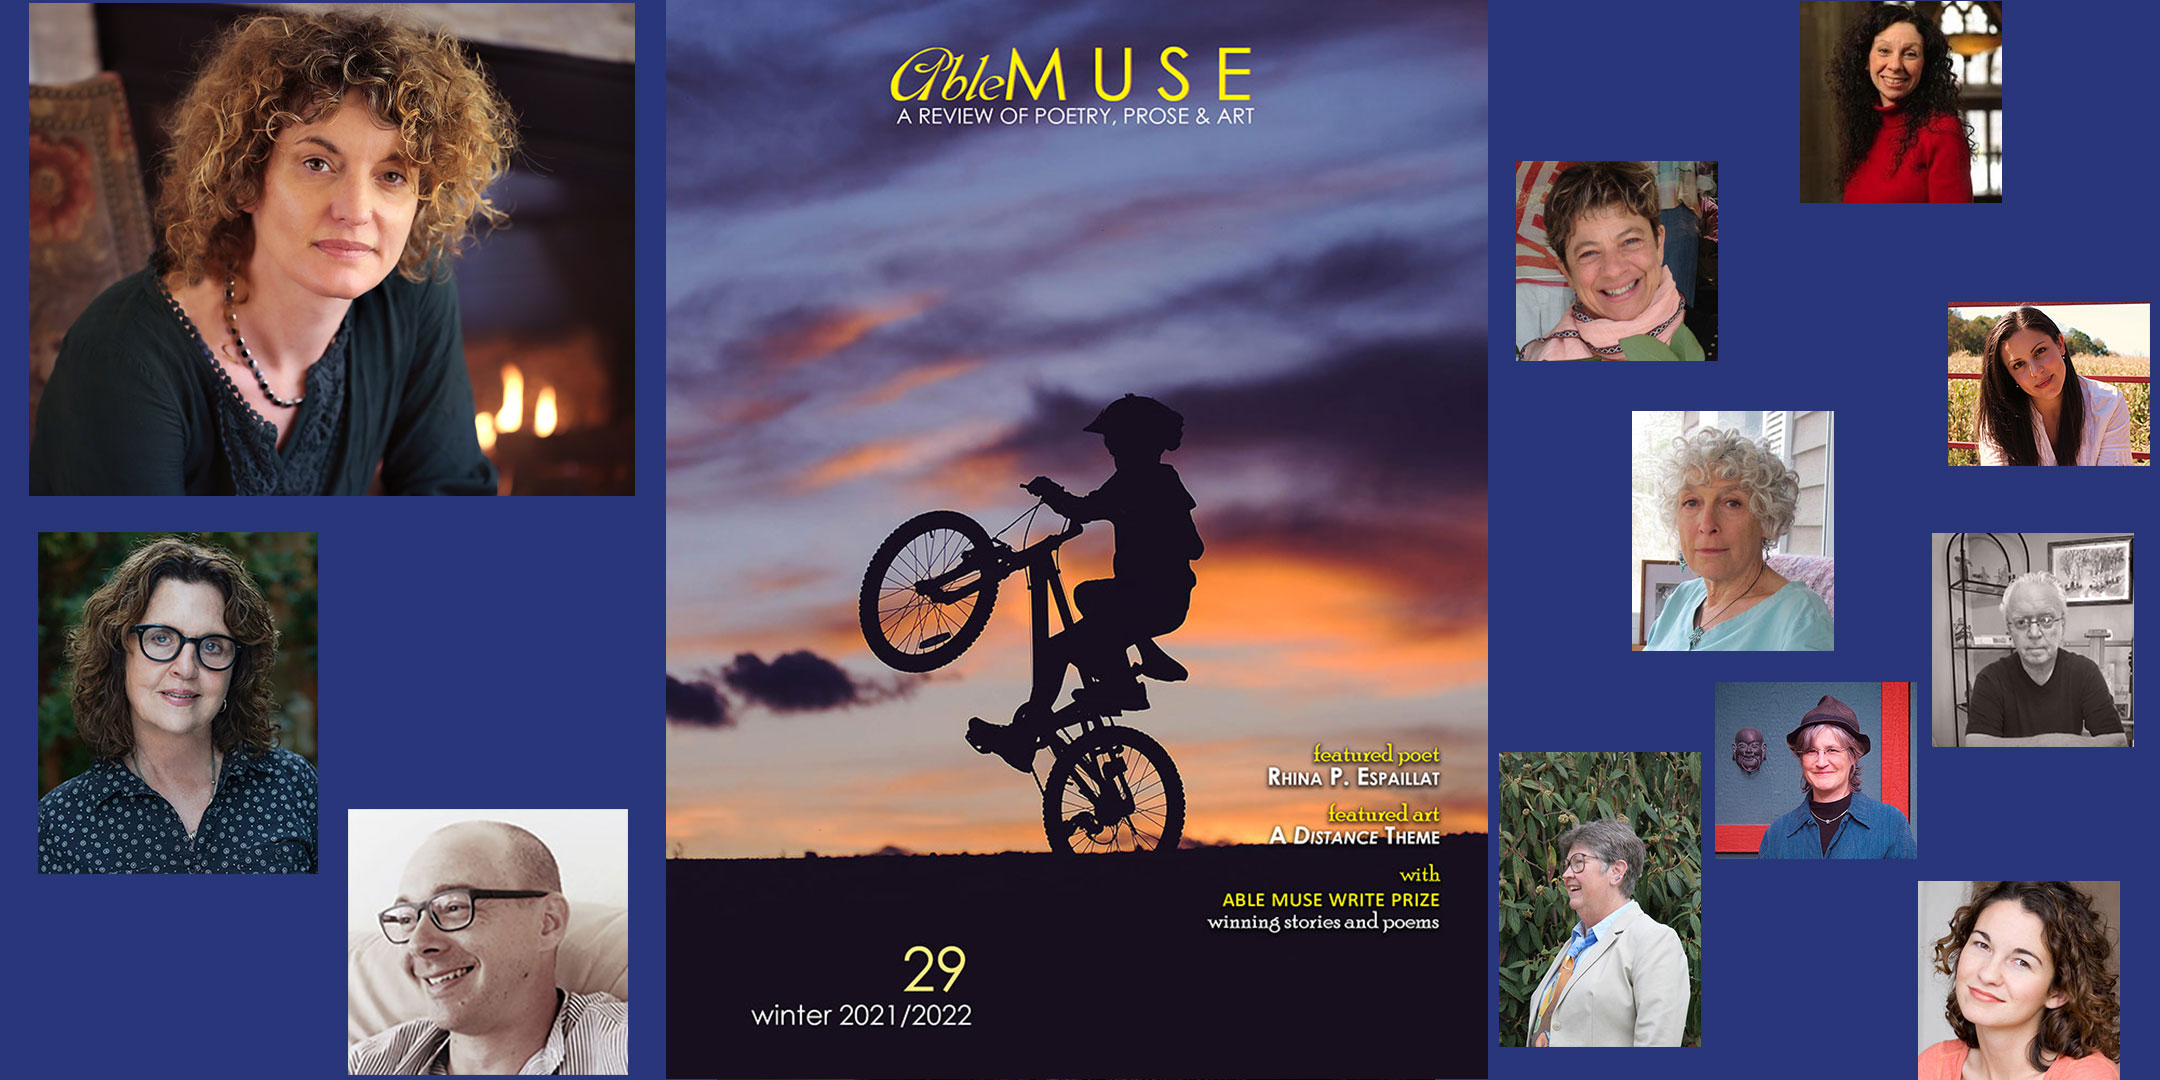 Able Muse, winter 2021/2022 launch reading